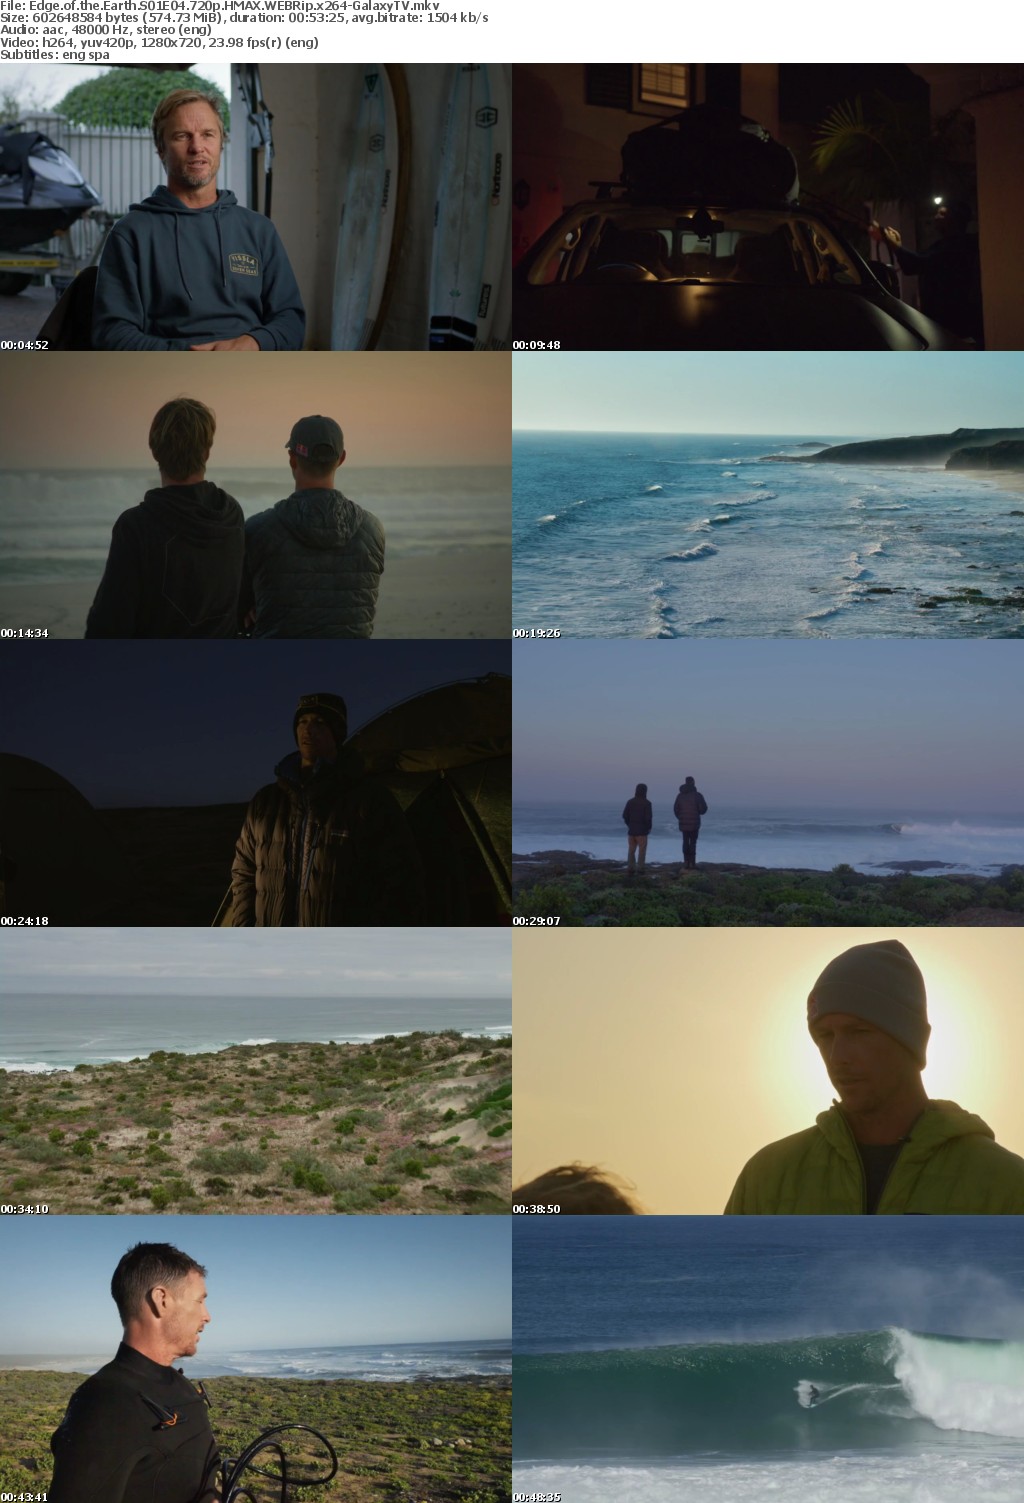 Edge of the Earth S01 COMPLETE 720p HMAX WEBRip x264-GalaxyTV